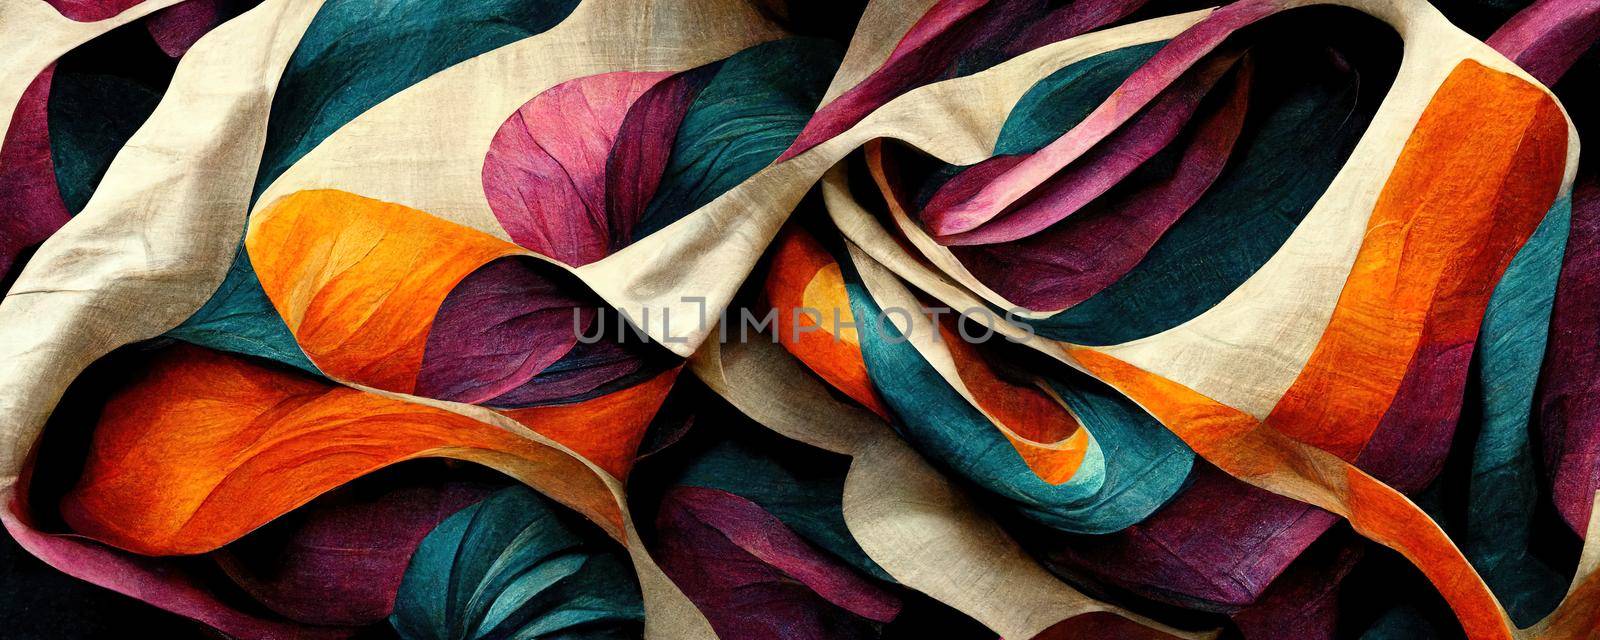 abstract stylish floral fabric ornament by TRMK